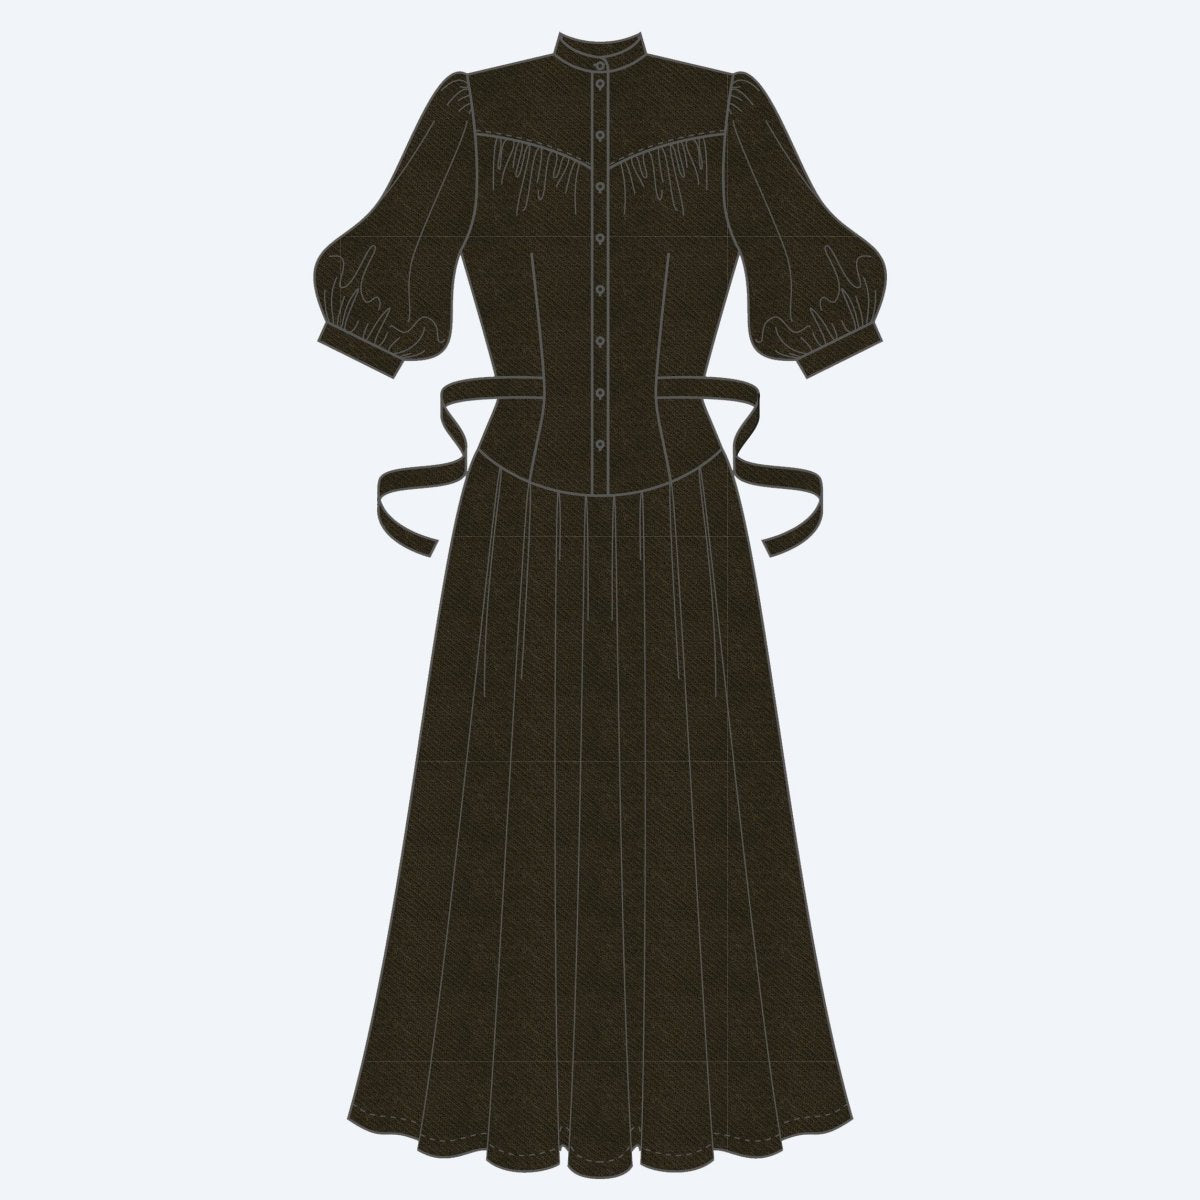 Computer line drawing of the Green Gables dress